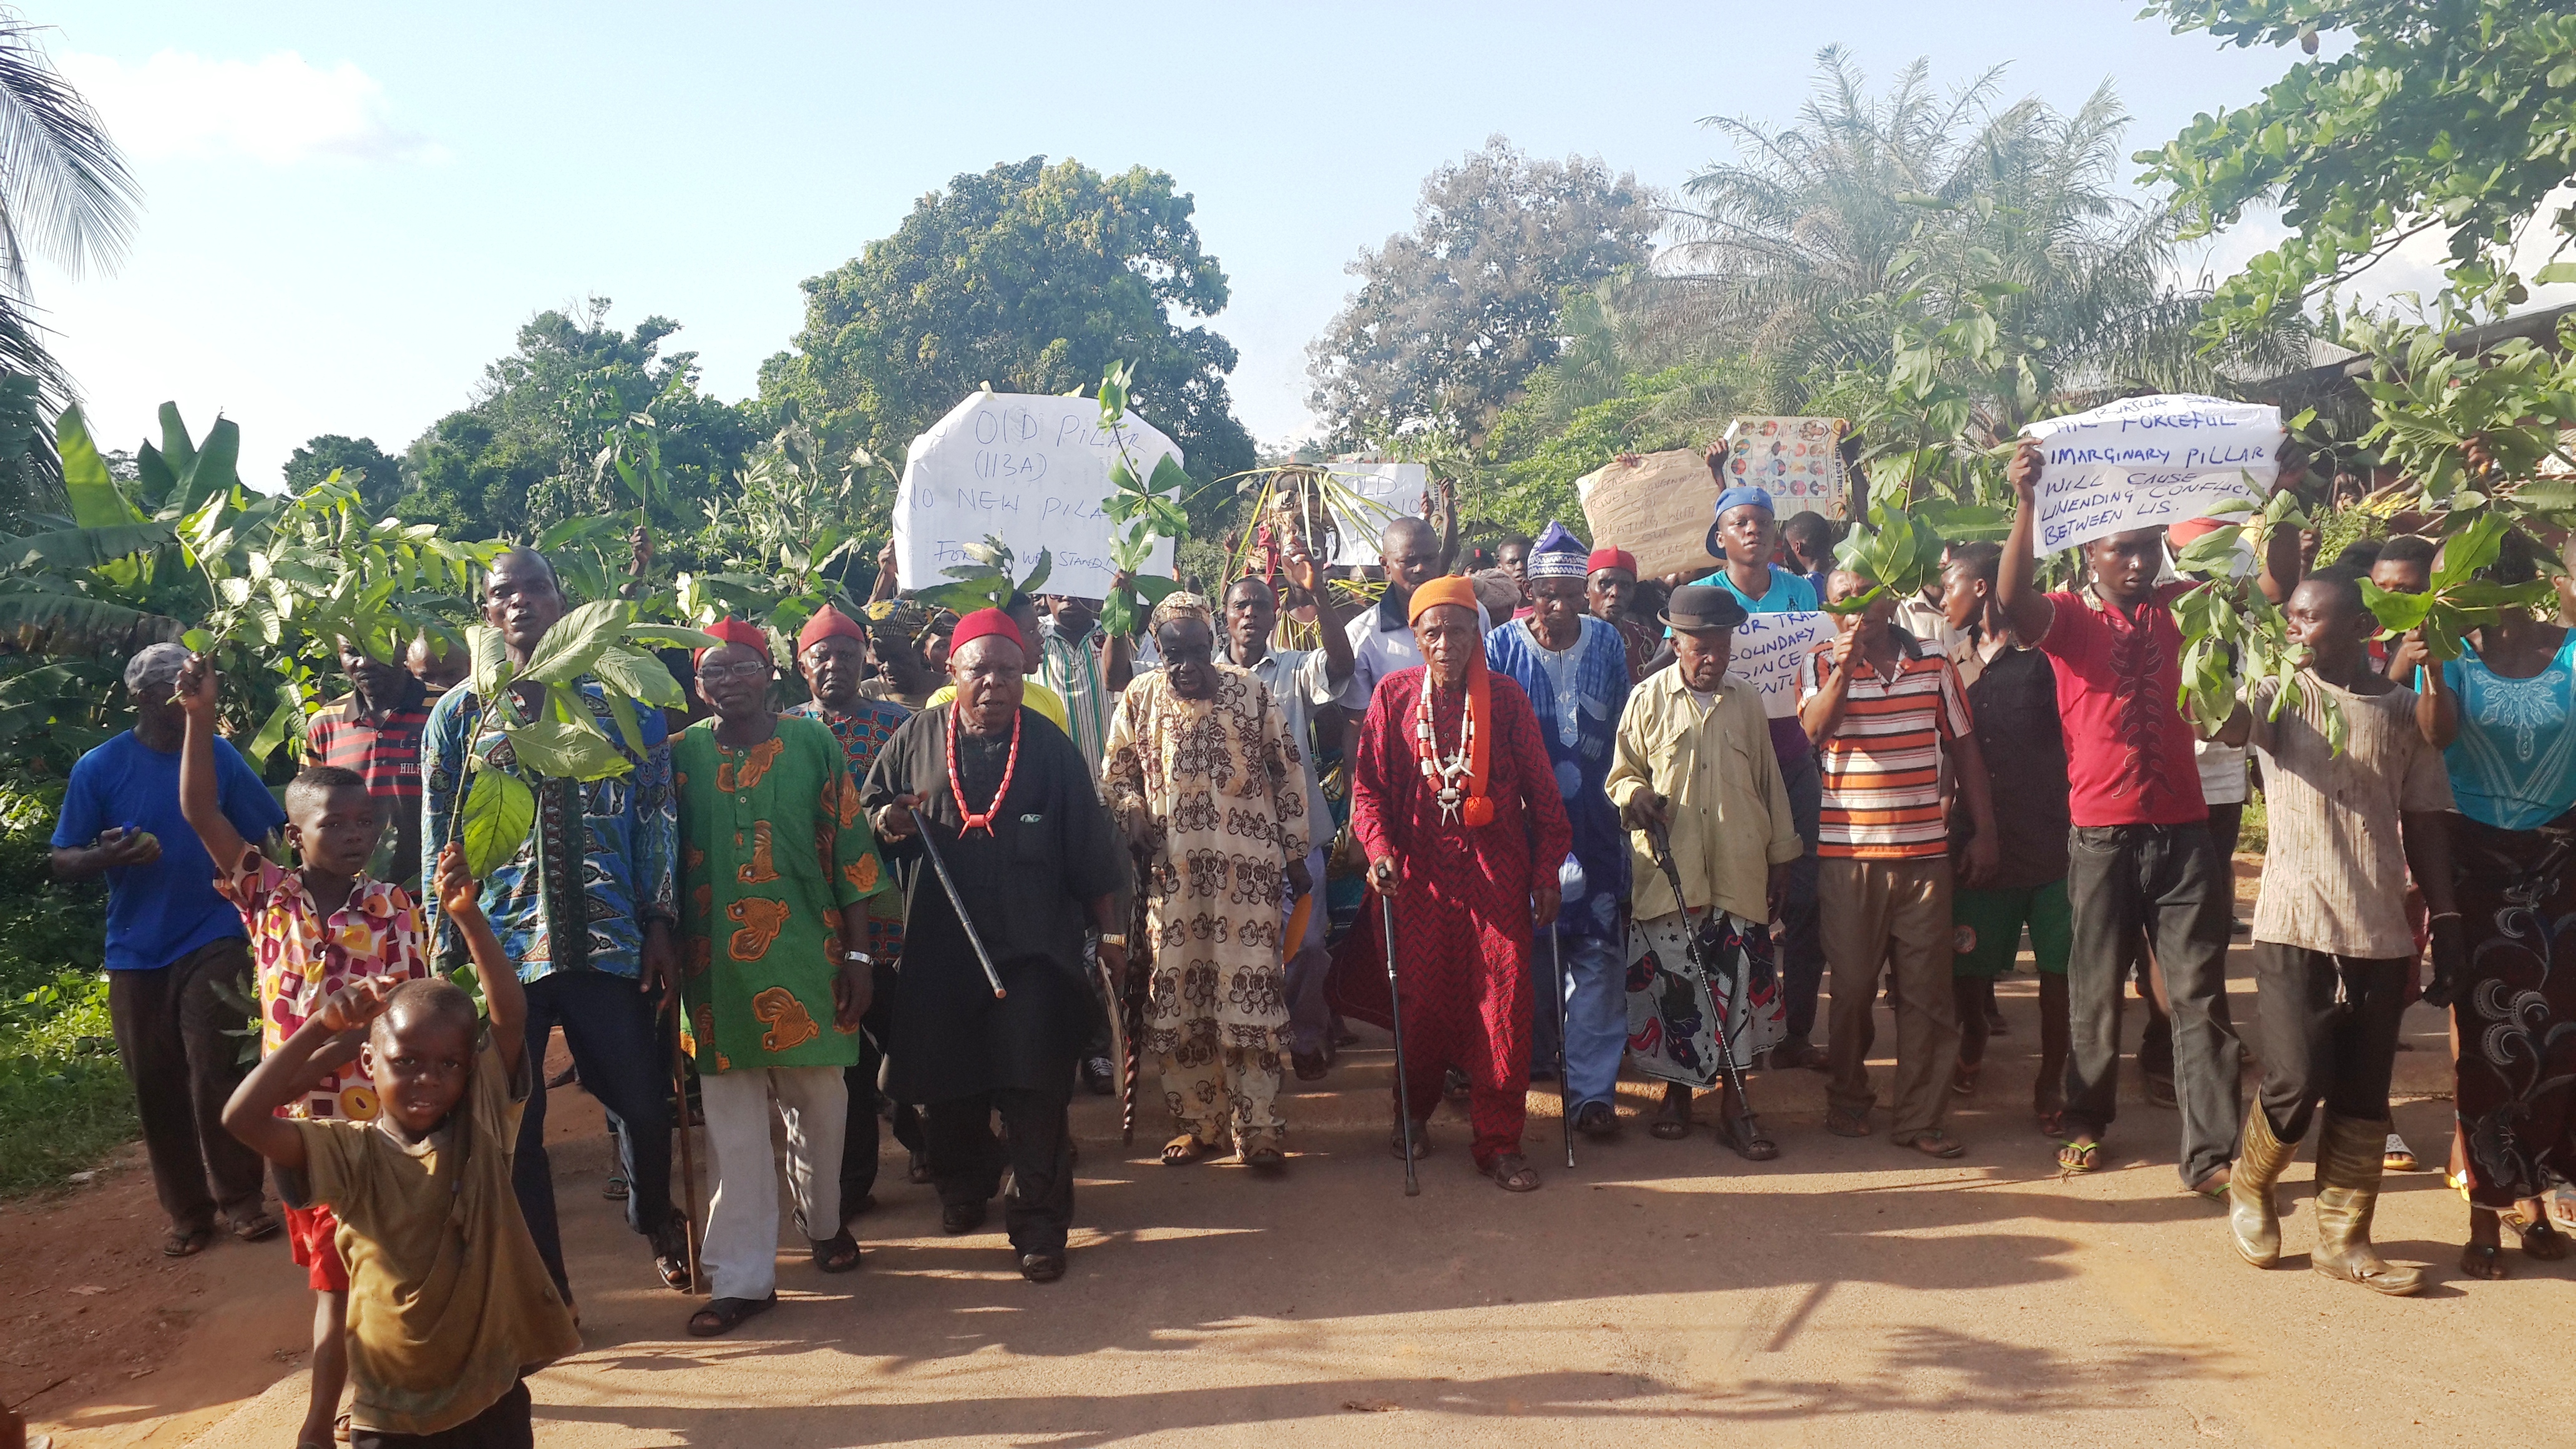 90 year old village head leading Danare people in protest